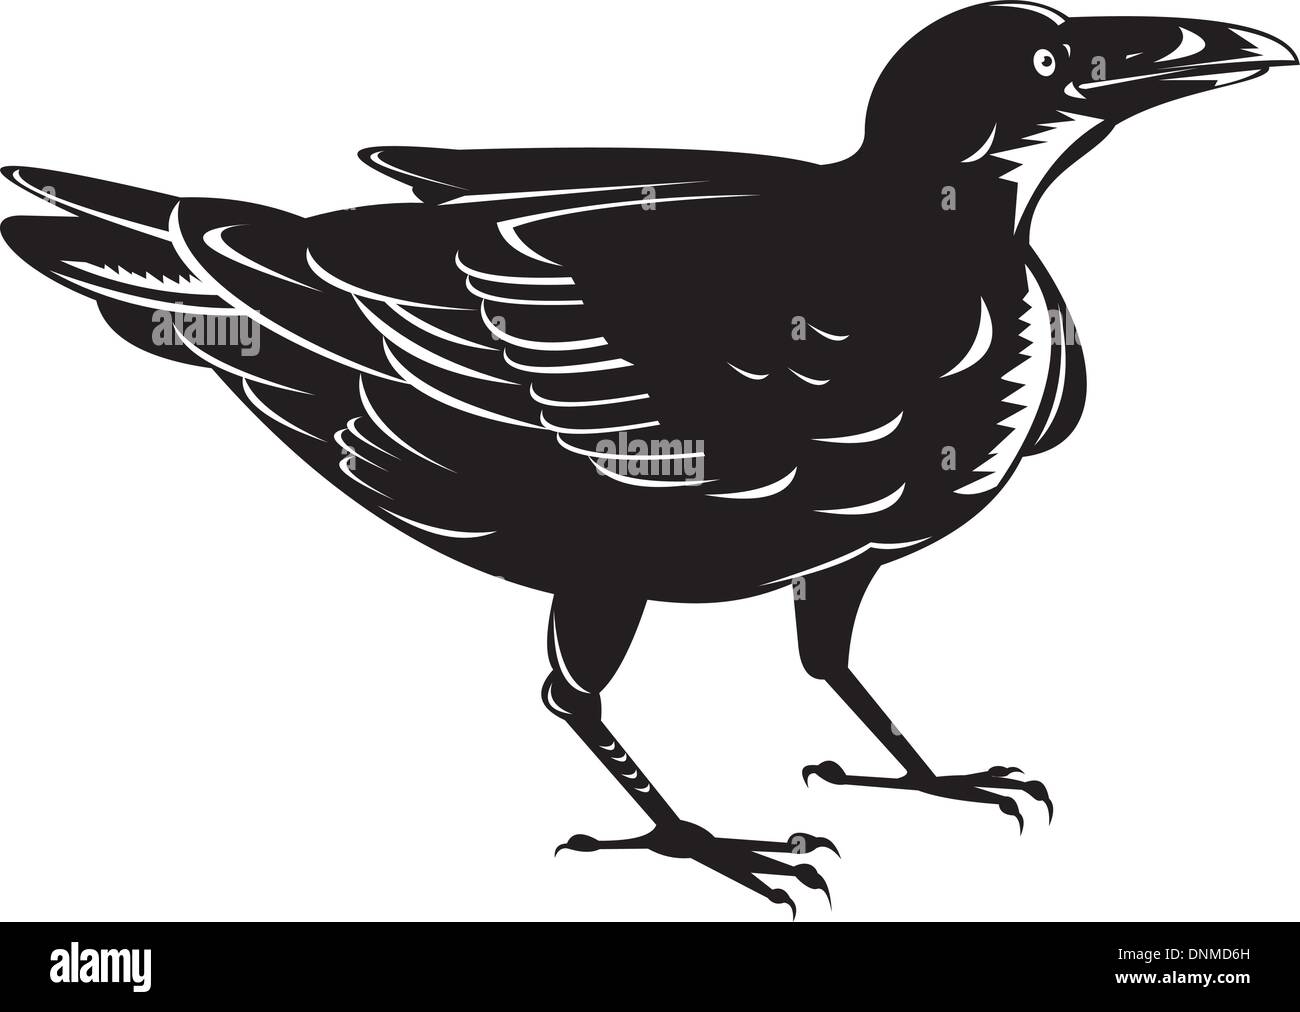 Illustration of a black raven done in retro woodcut style. Stock Vector